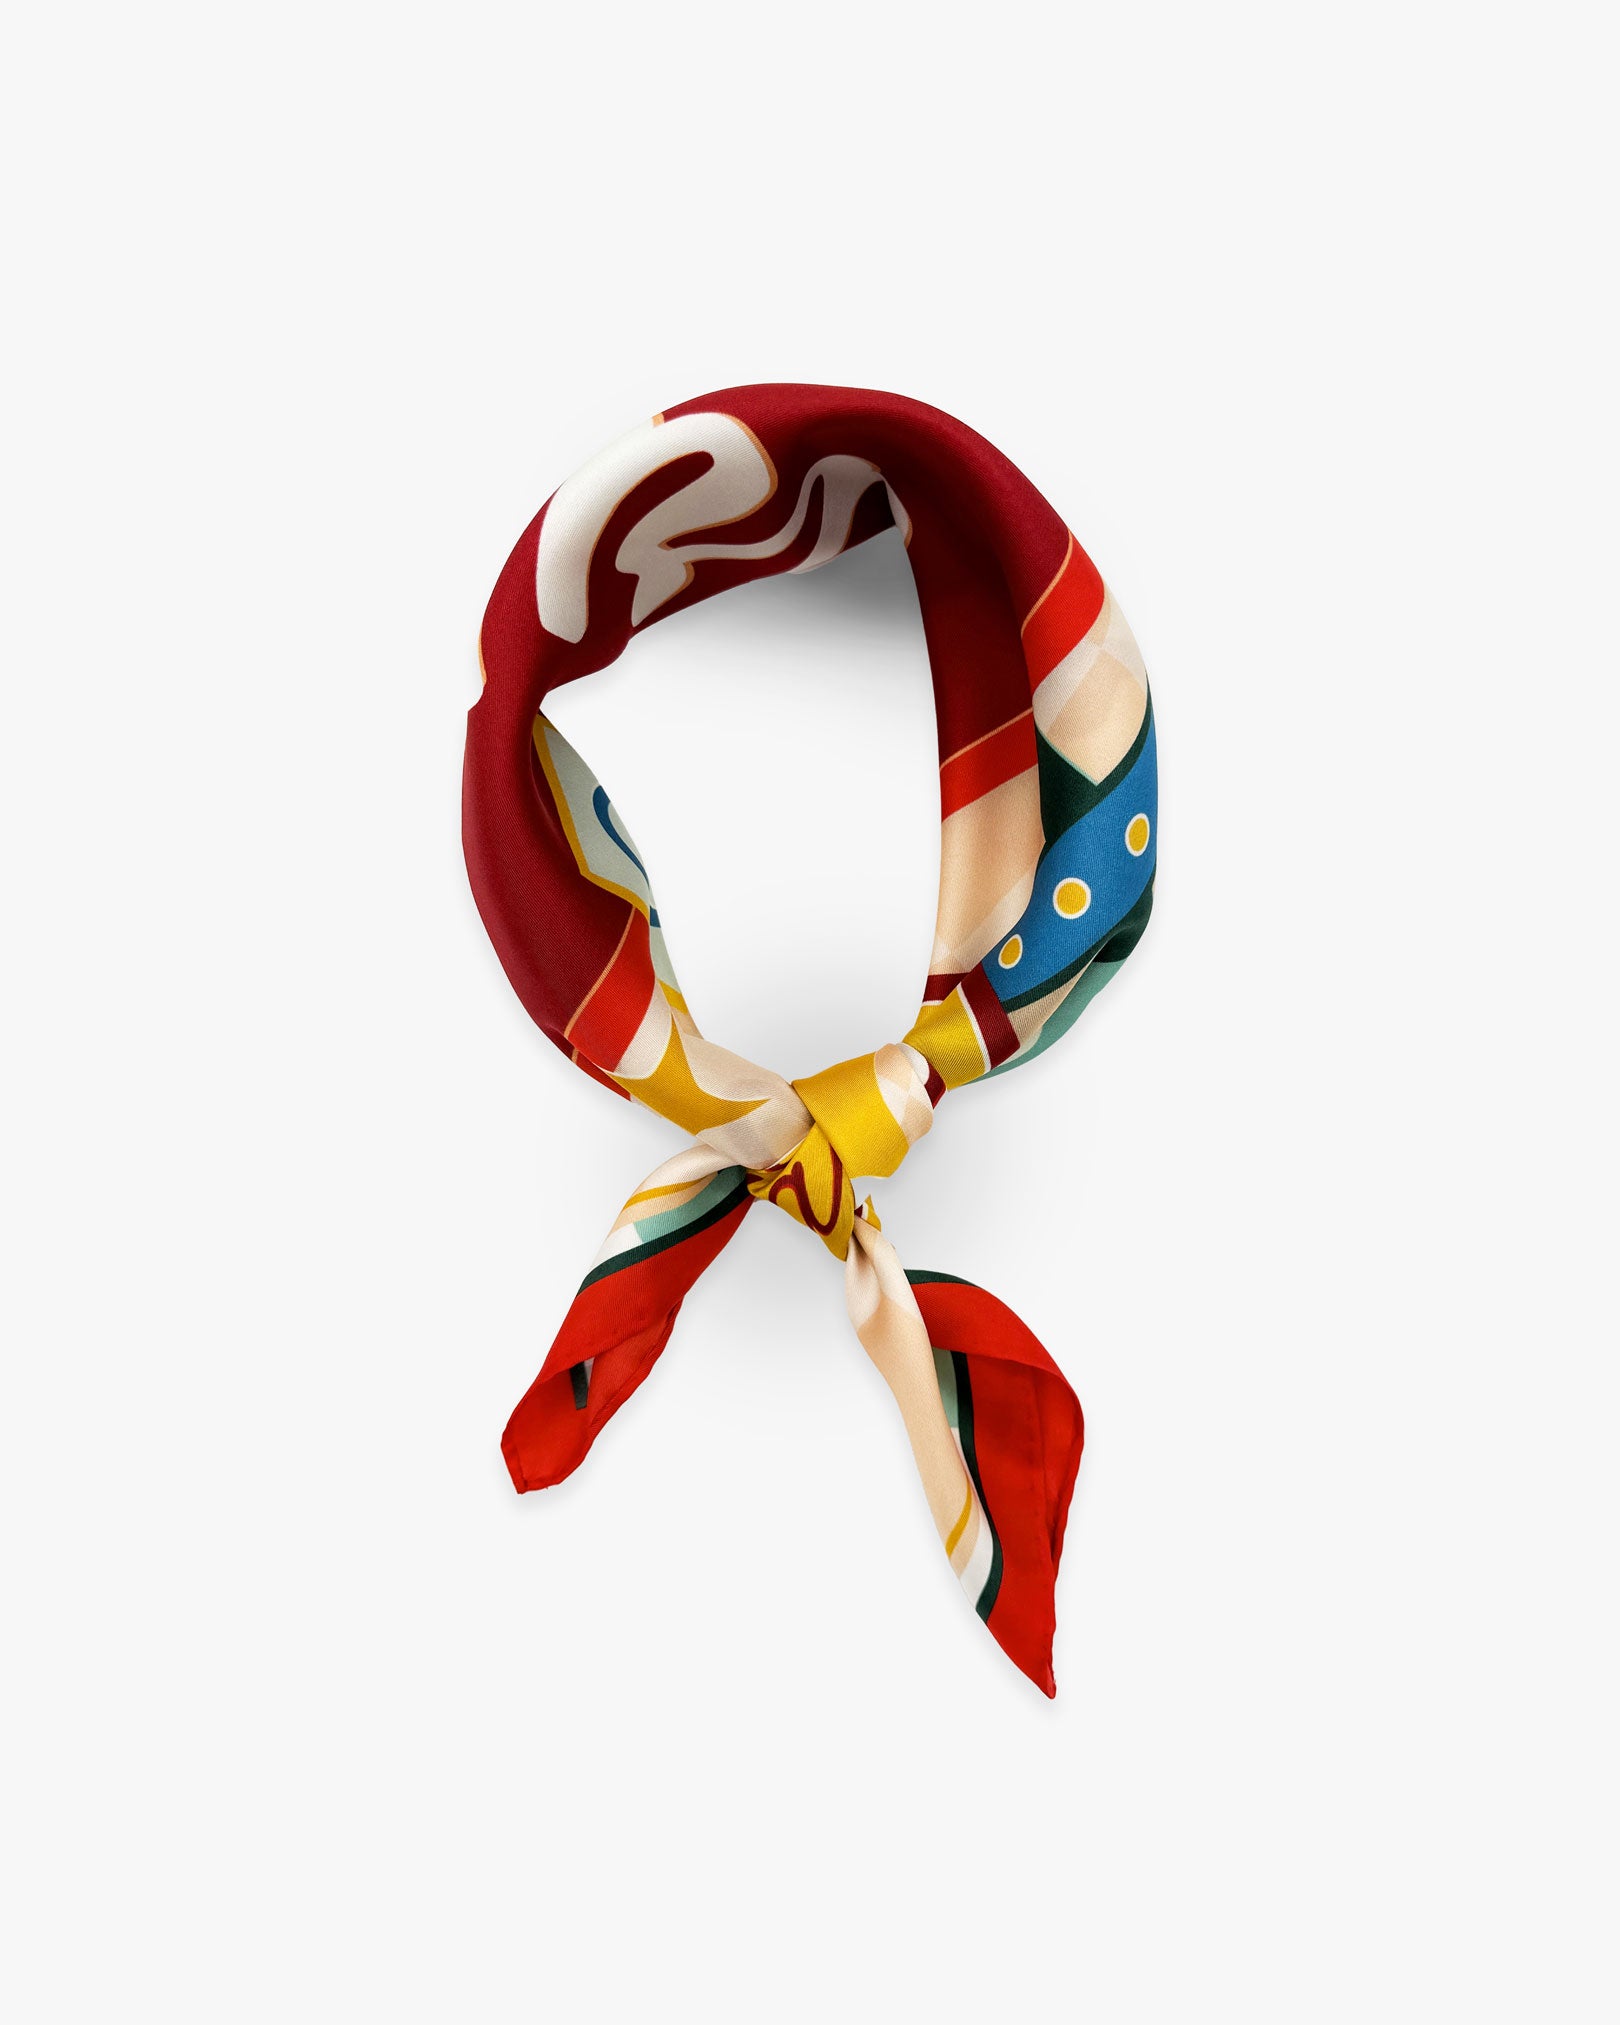 The 'Soho Sign' red silk neckerchief from SOHO Scarves knotted and looped against a white background.